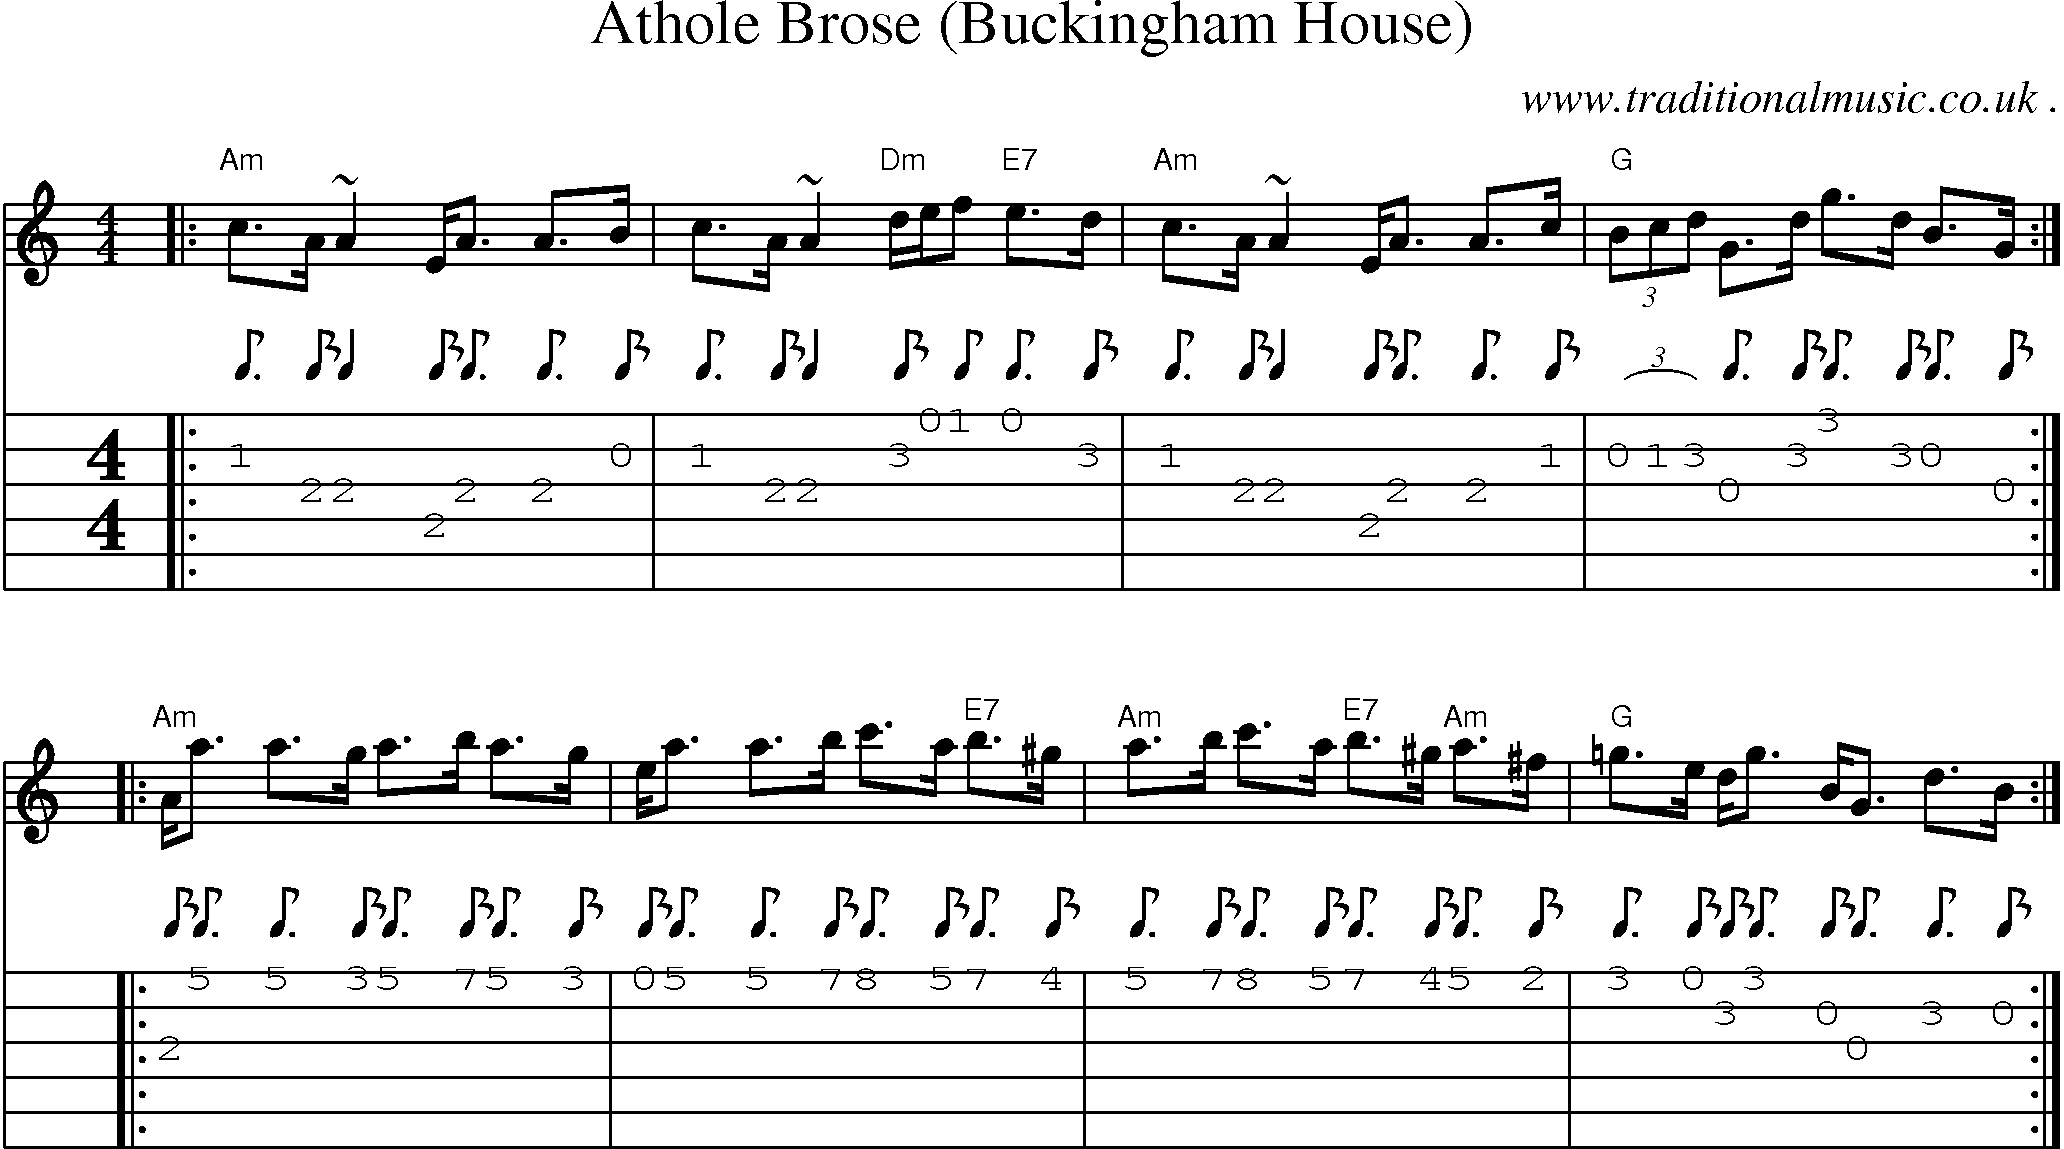 Sheet-music  score, Chords and Guitar Tabs for Athole Brose Buckingham House